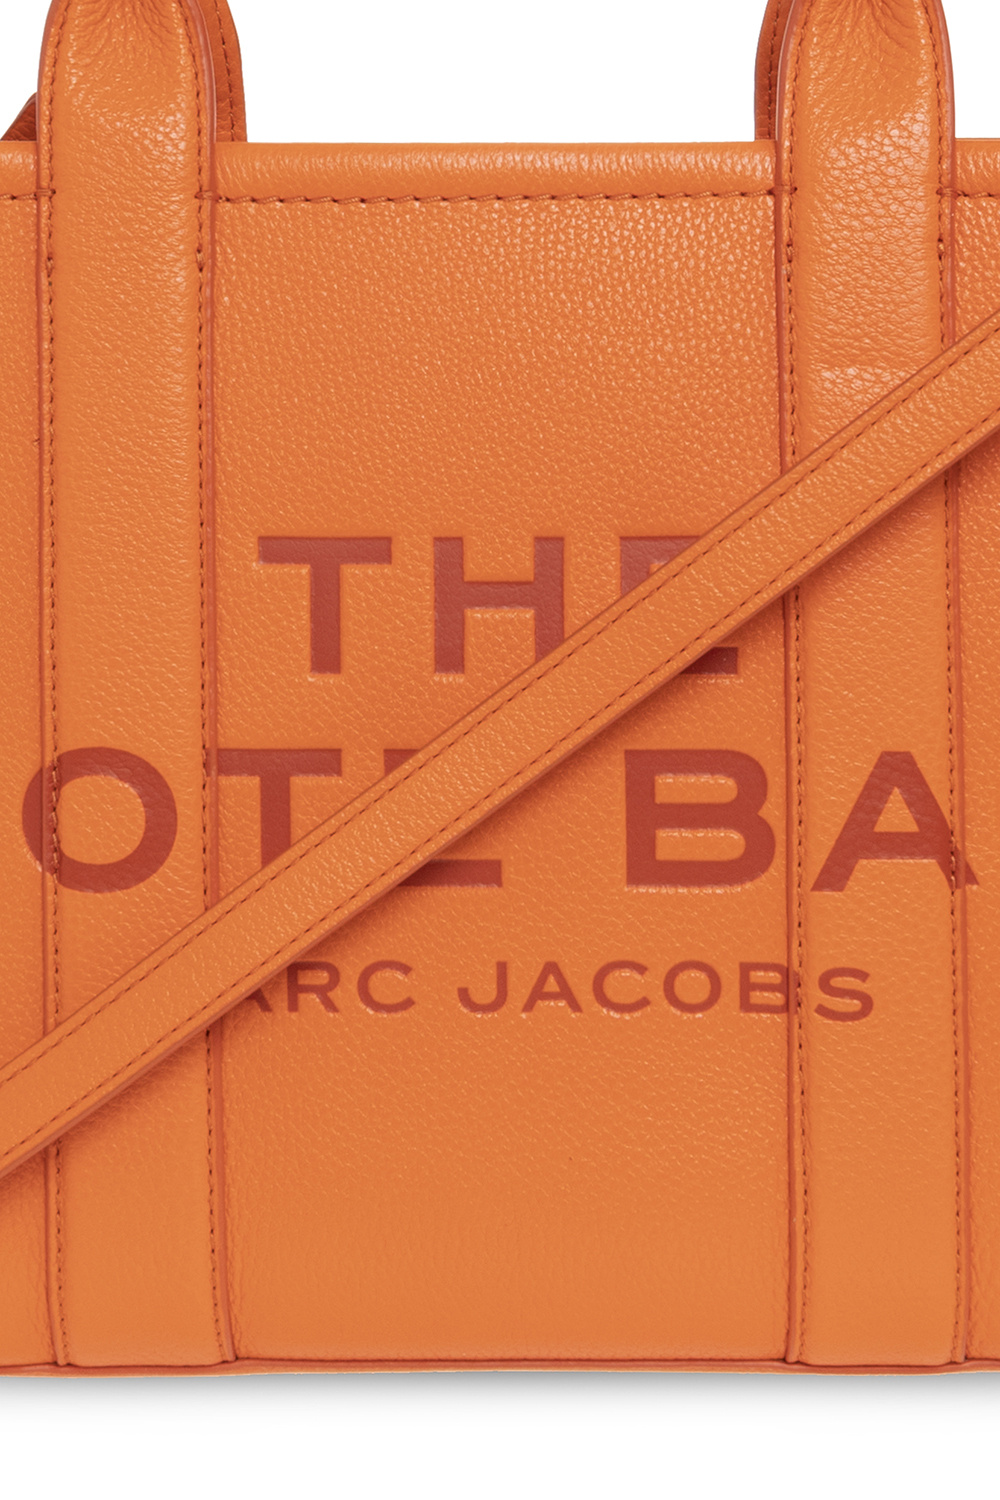 Marc Jacobs ‘The Tote Small’ shoulder bag